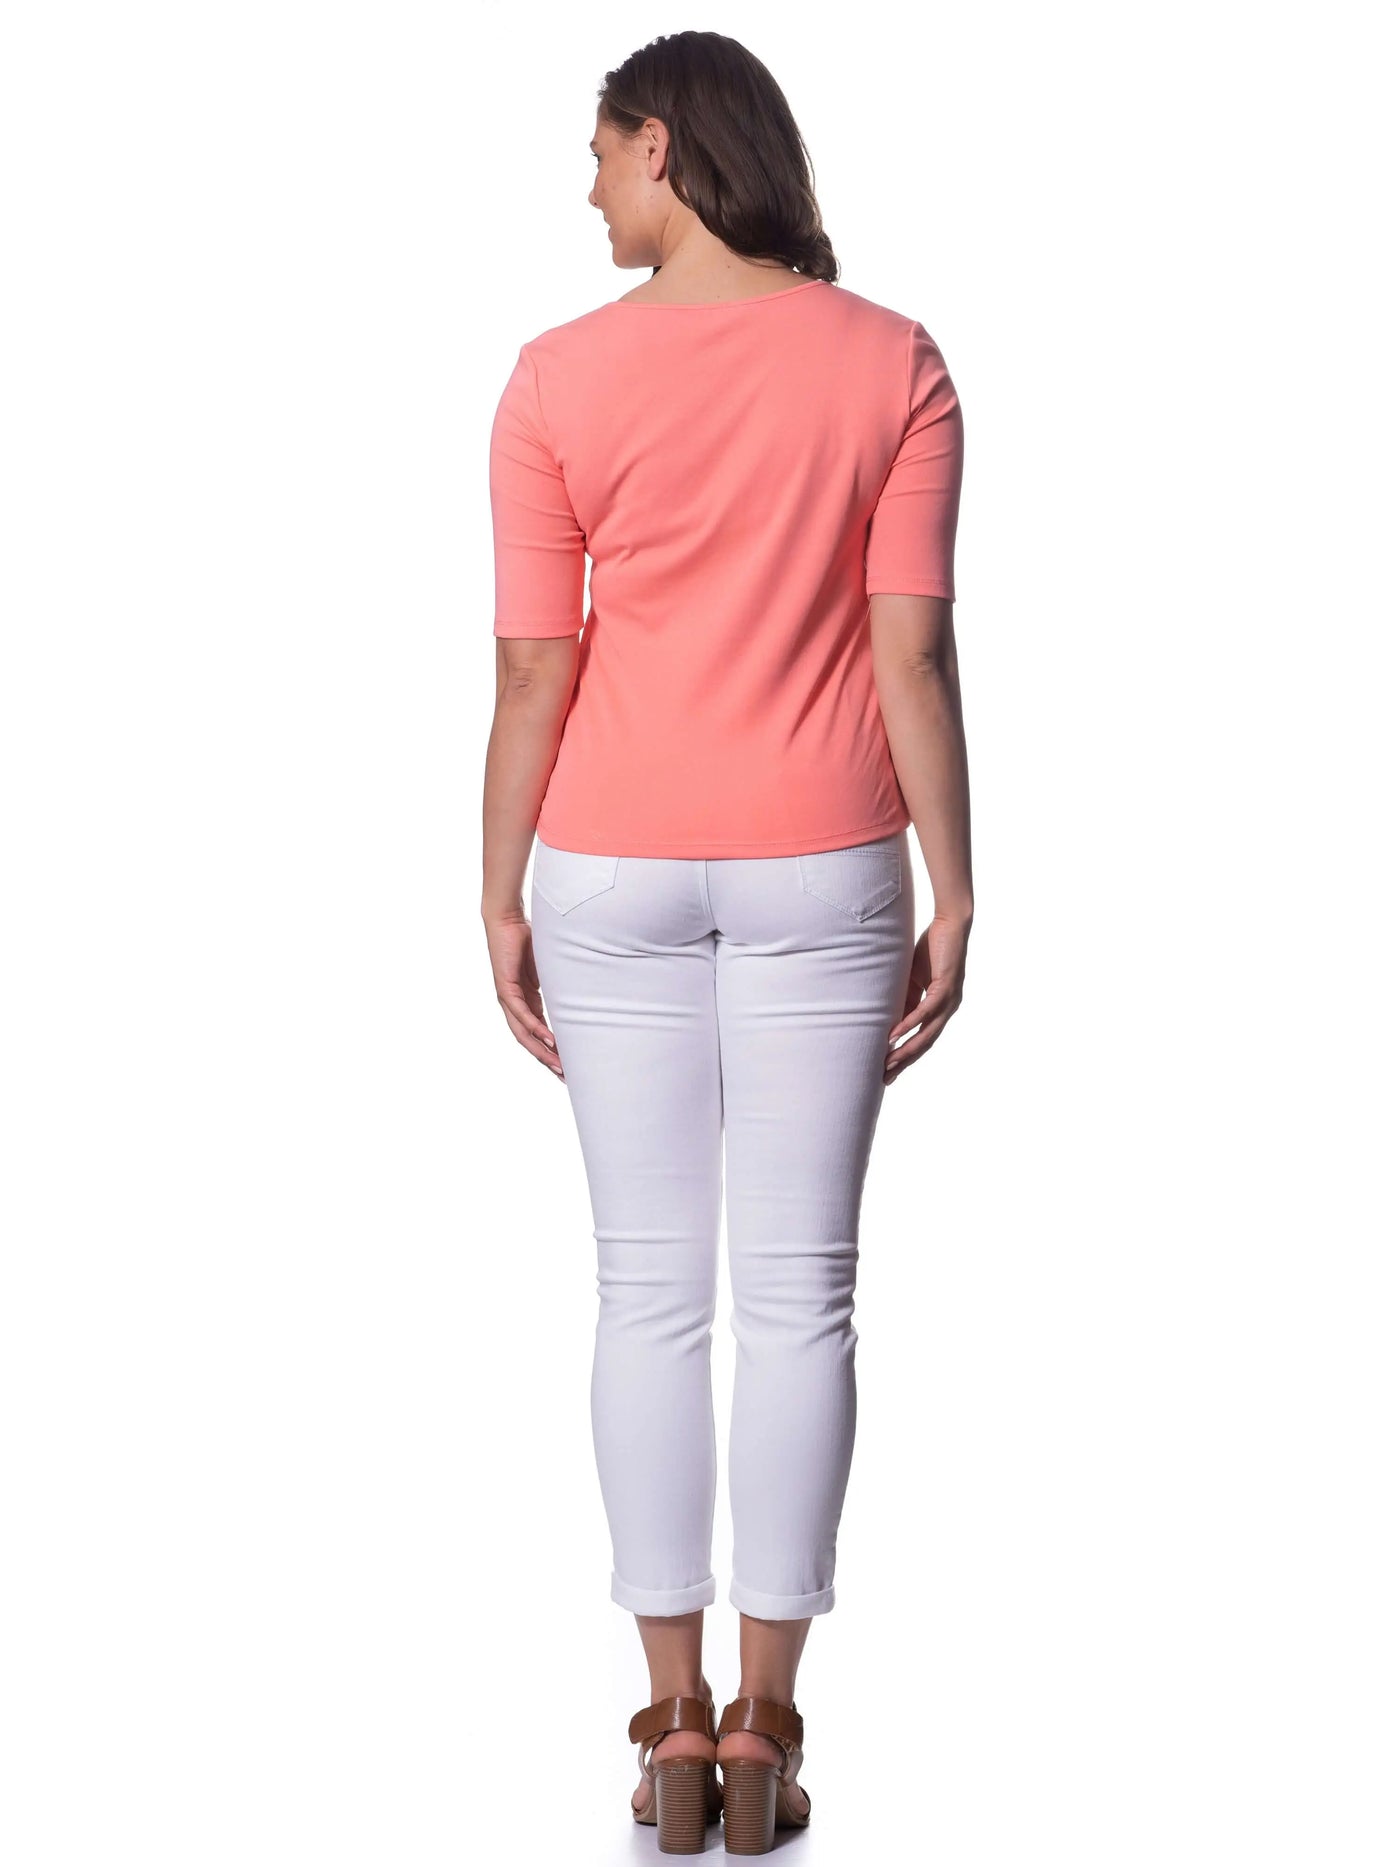 Summer Top - Coral Corfu Jeans